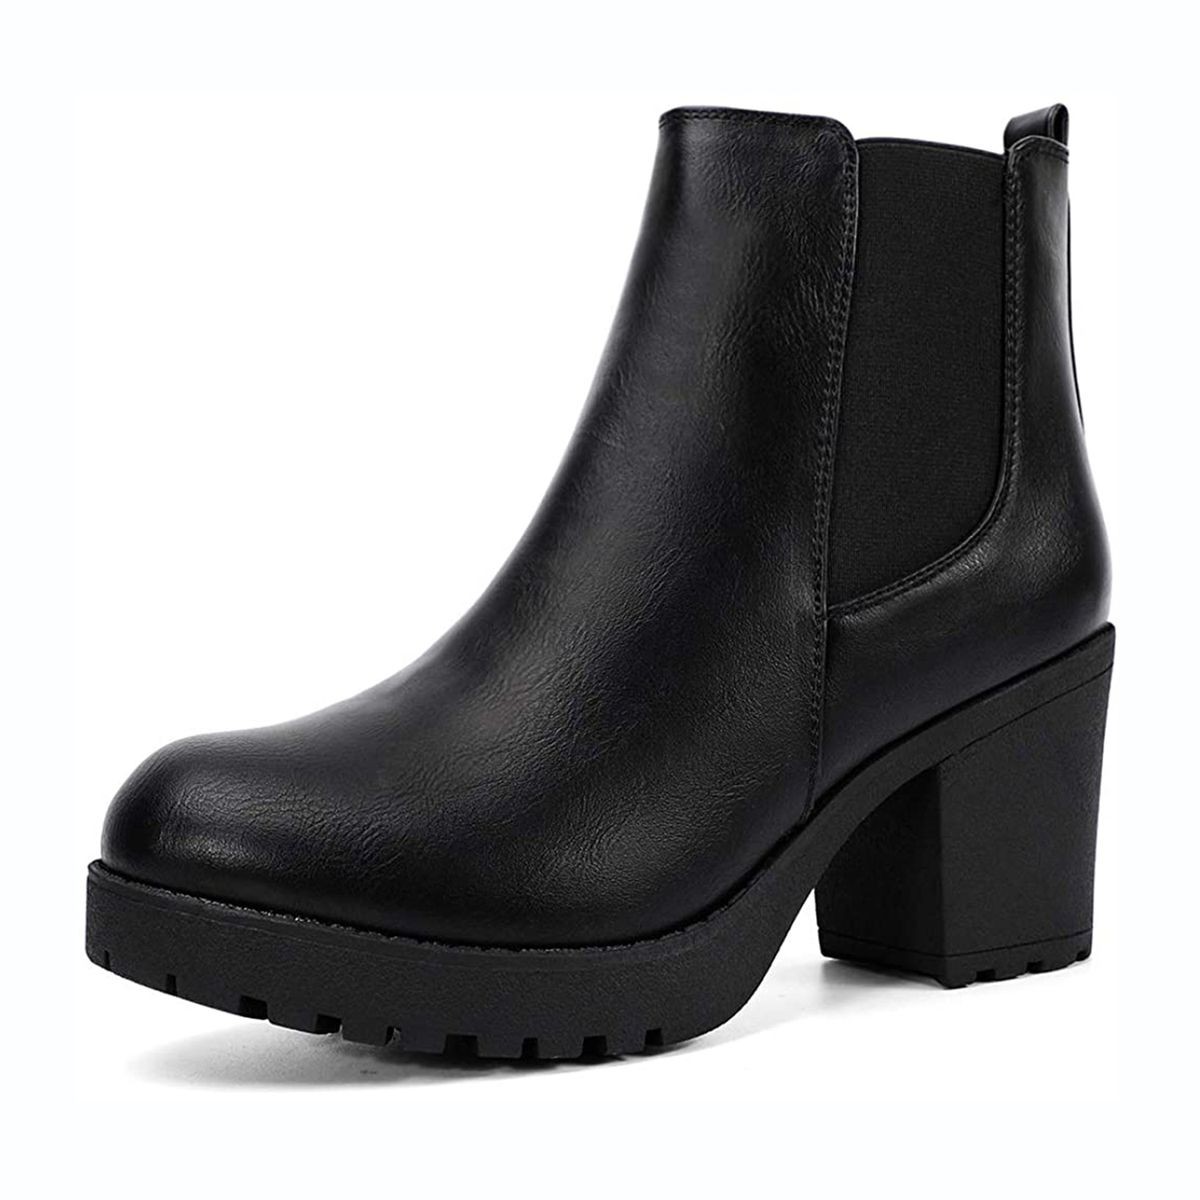 Moda Chics Women's Ankle Boots